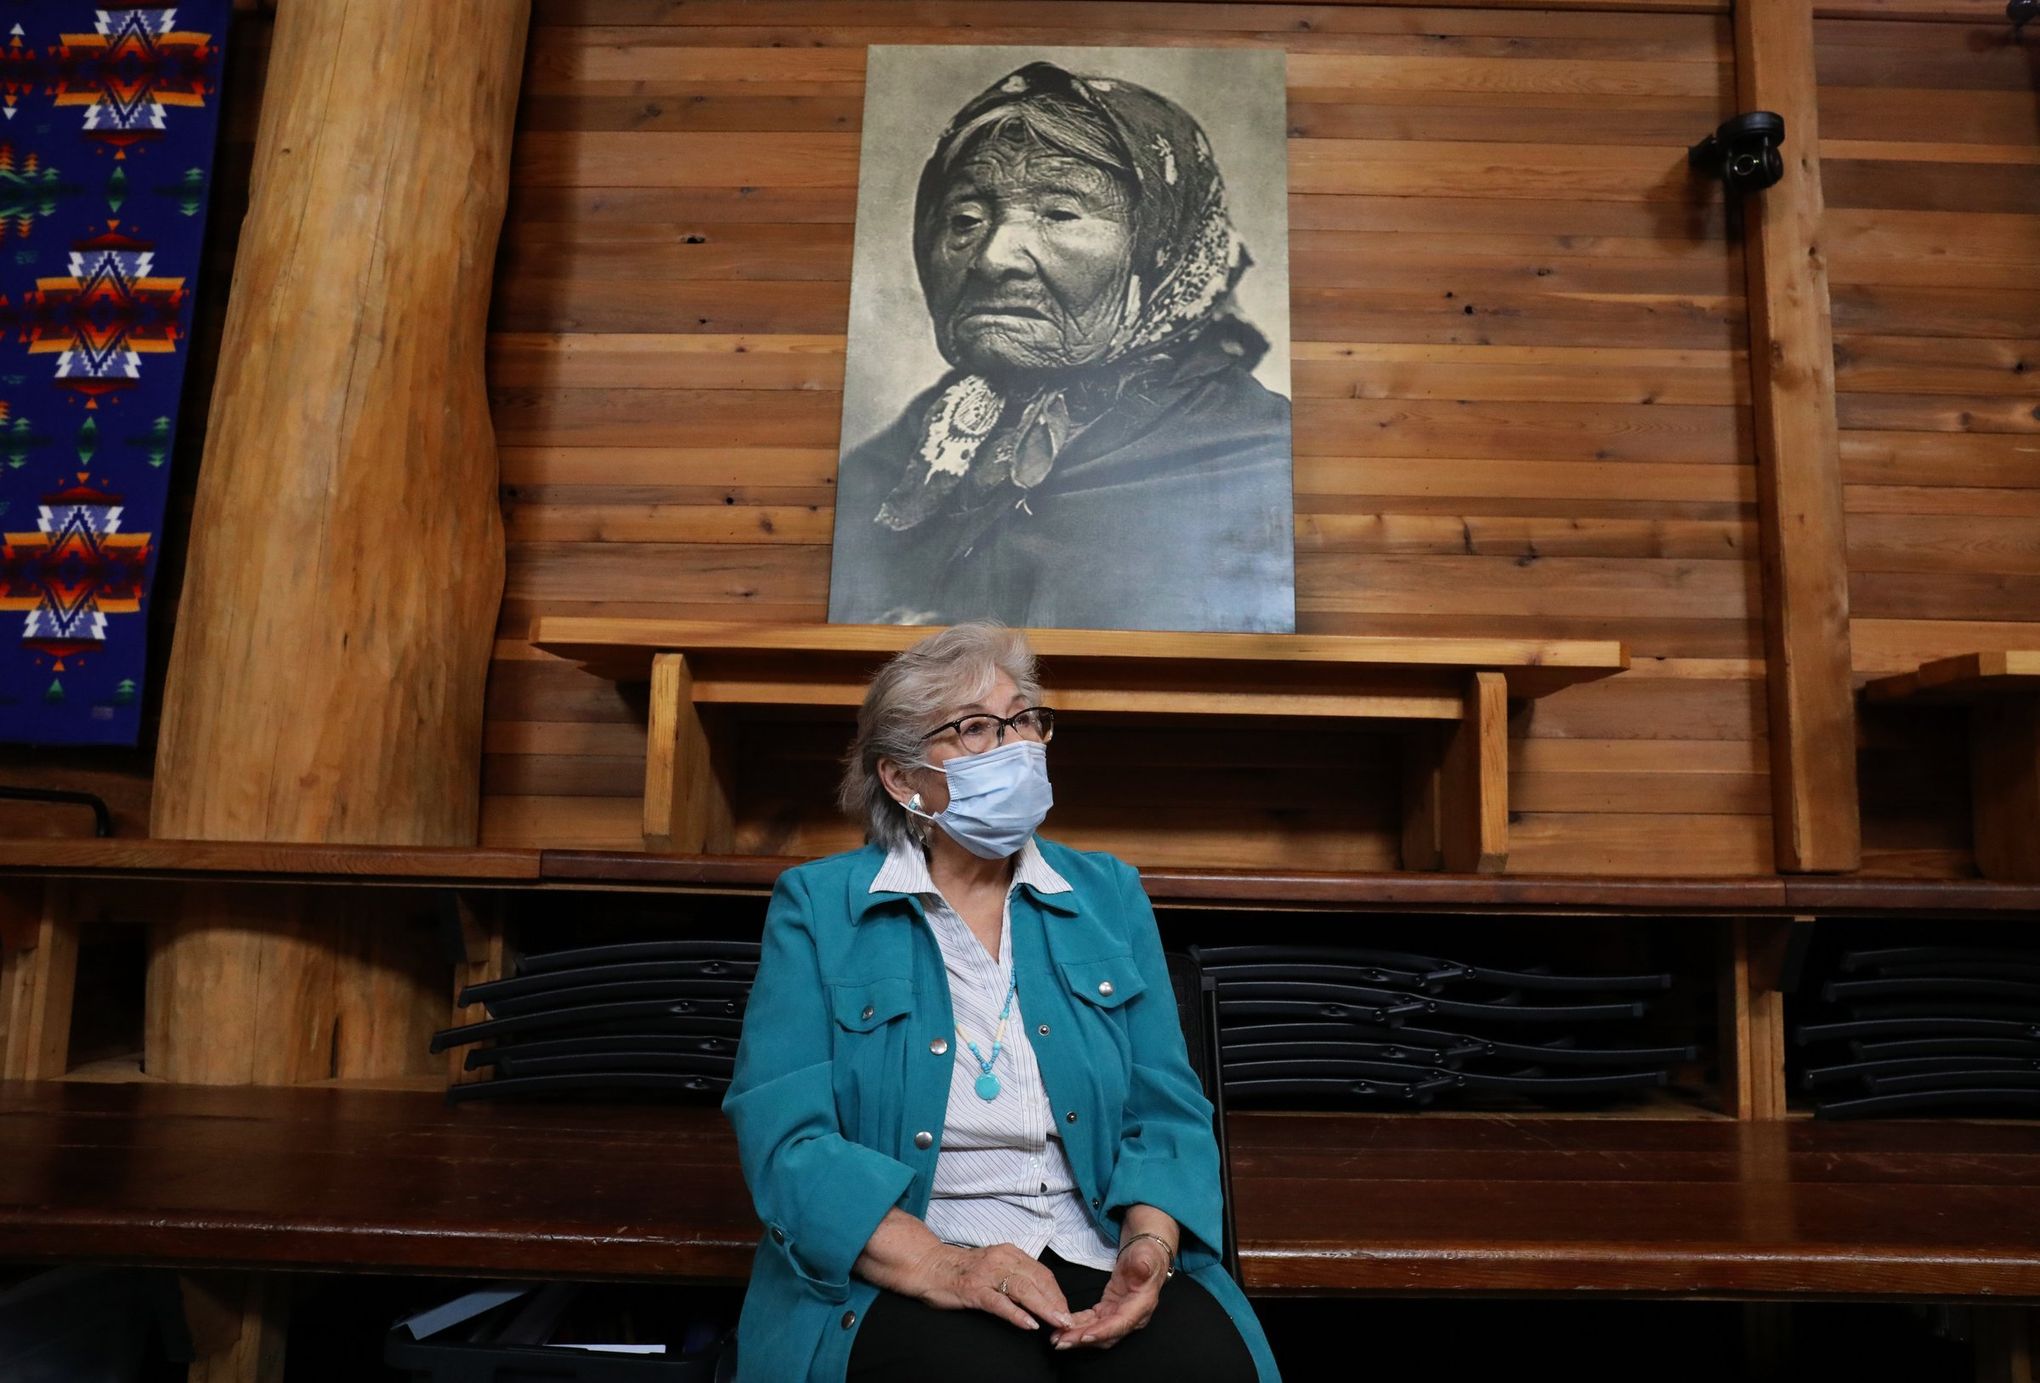 Cecile Hansen, chairwoman of the Duwamish tribal council, shown in their longhouse with a portrait of Princess Angeline, the eldest daughter of Chief Seattle.